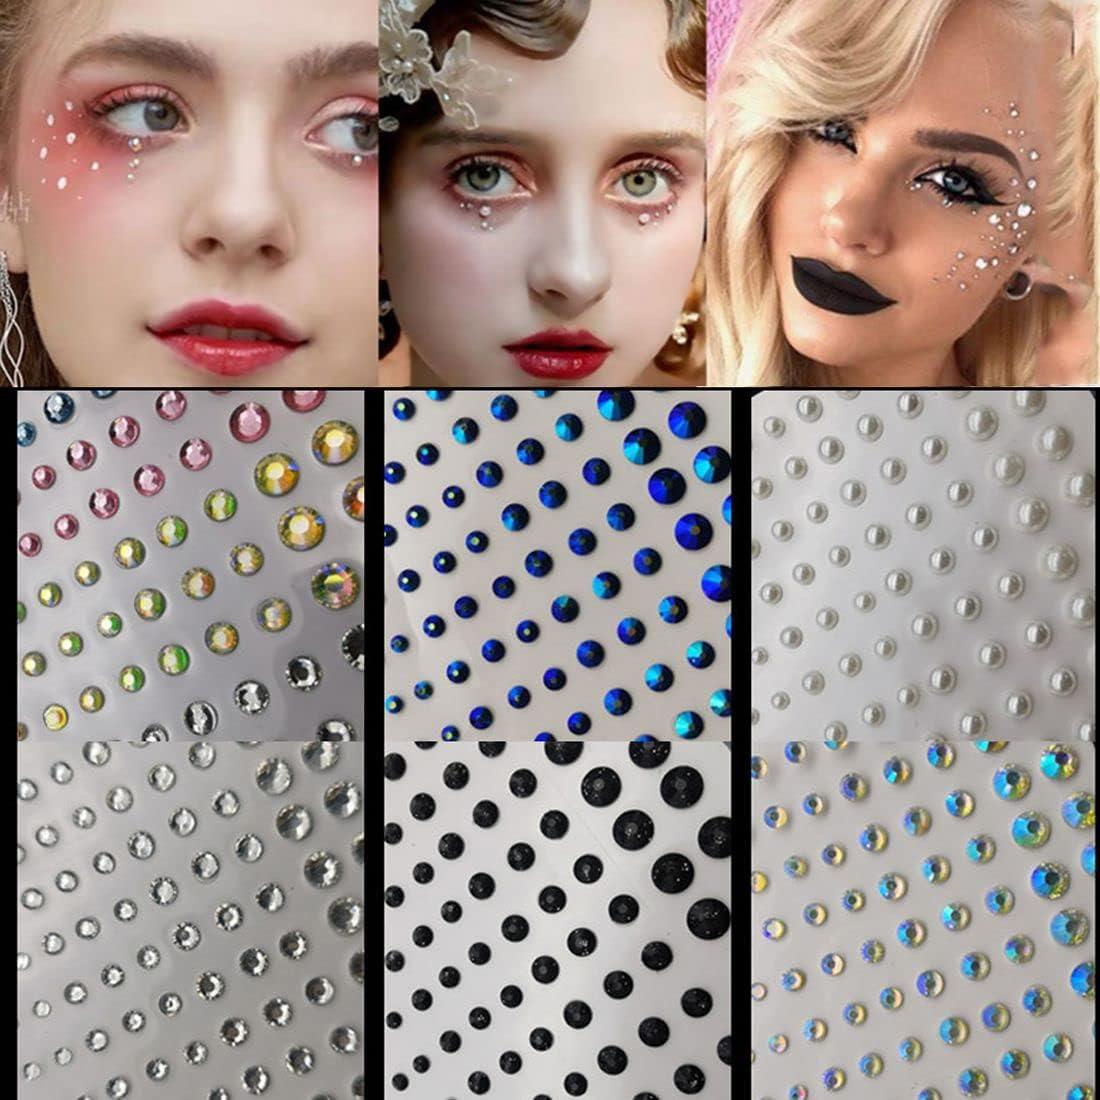 3D Self Adhesive Nail Rhinestone Stickers 6 Sheets Mixed Size Eyeshadow  Face Jewels for Women Face Gems Makeup Party Festival Accessory 6sheet